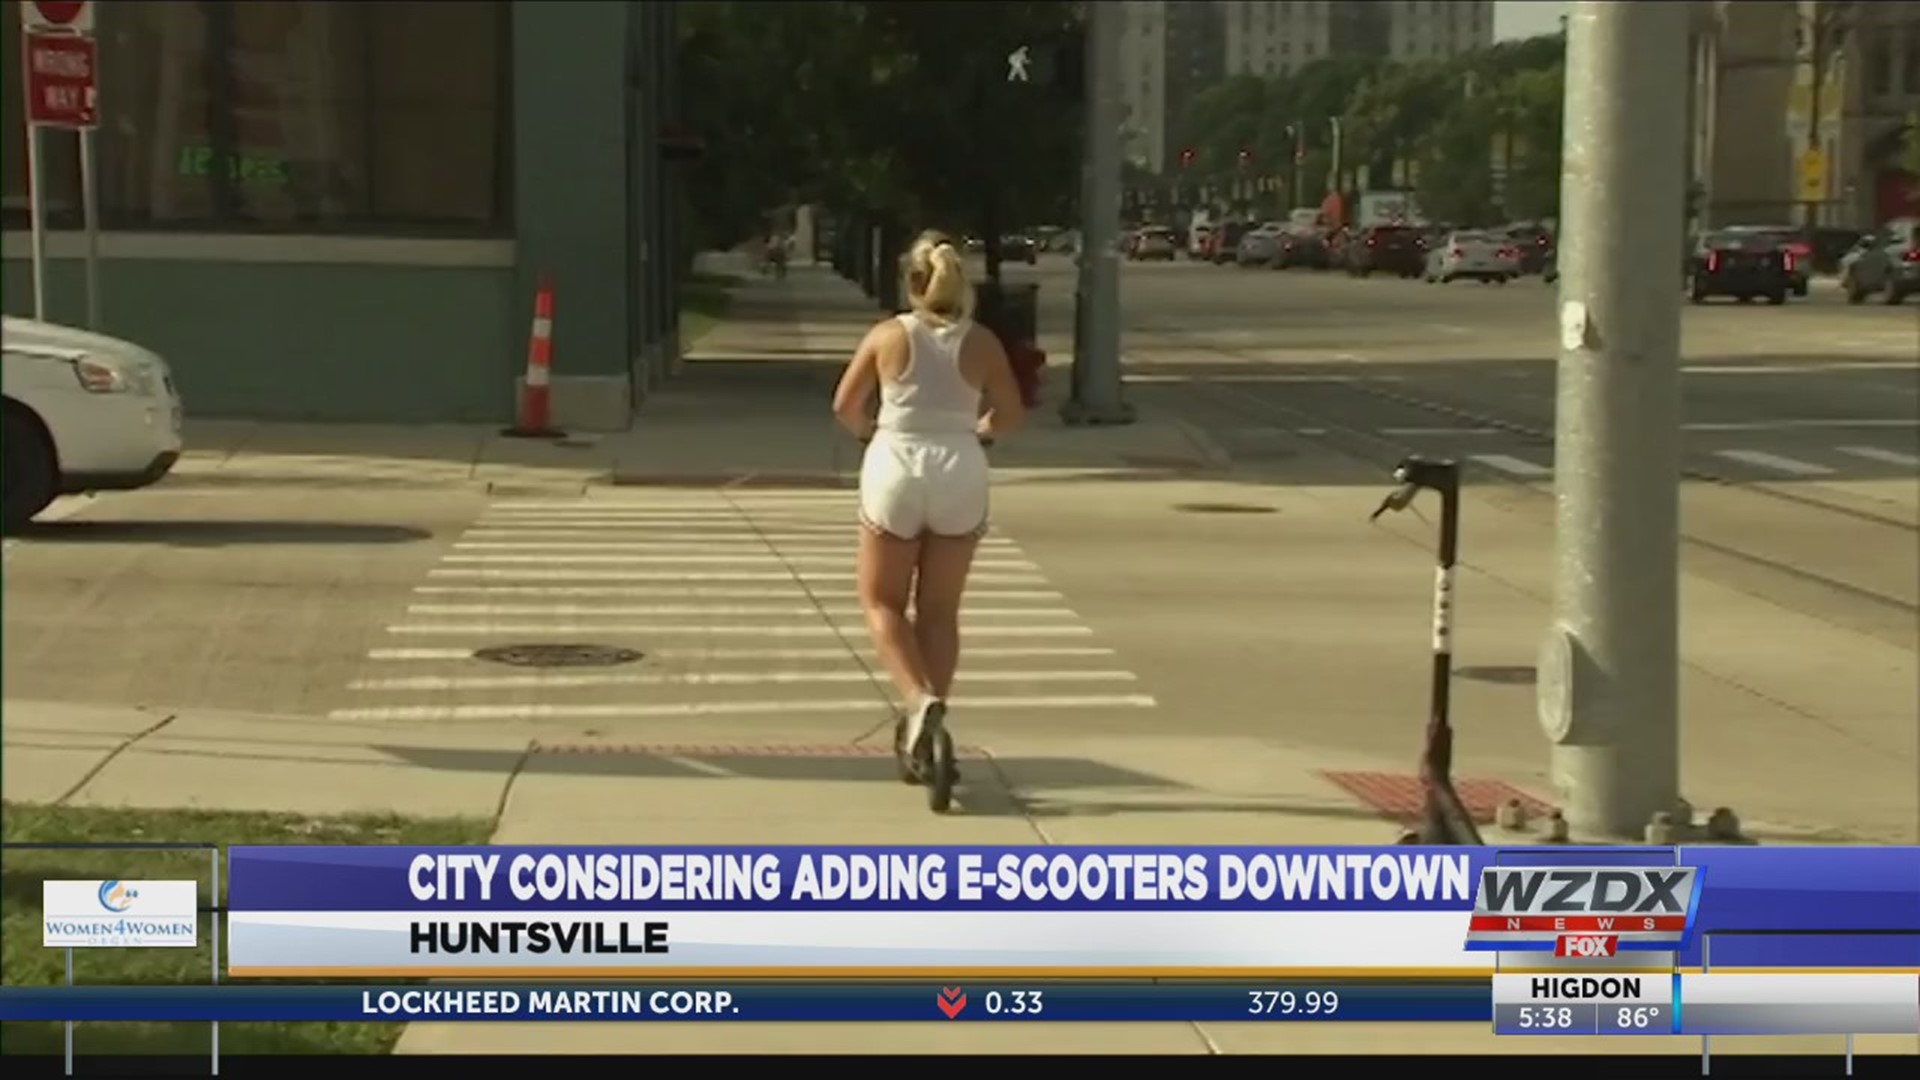 Huntsville is looking at adding electric scooters to the downtown area.